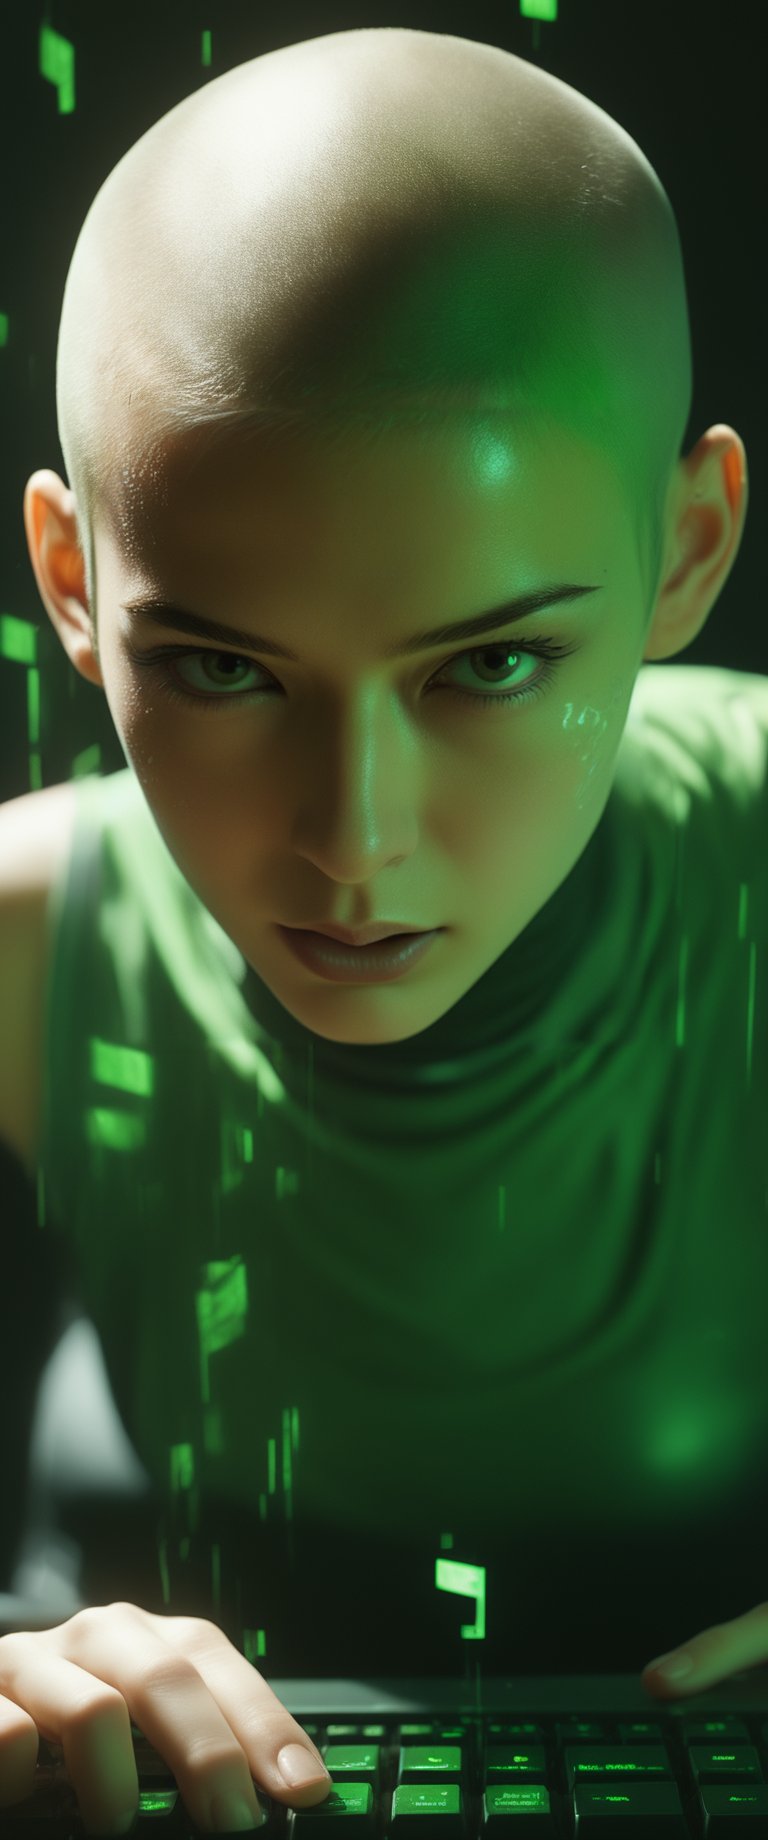 hacker with a shaved head and vibrant green streaks dyed into her remaining hair. Her fingers fly across a holographic keyboard, cracking the secure mainframe of a virtual world. A defiant smirk dances on her lips, her expression a mix of mischief and exhilaration.
